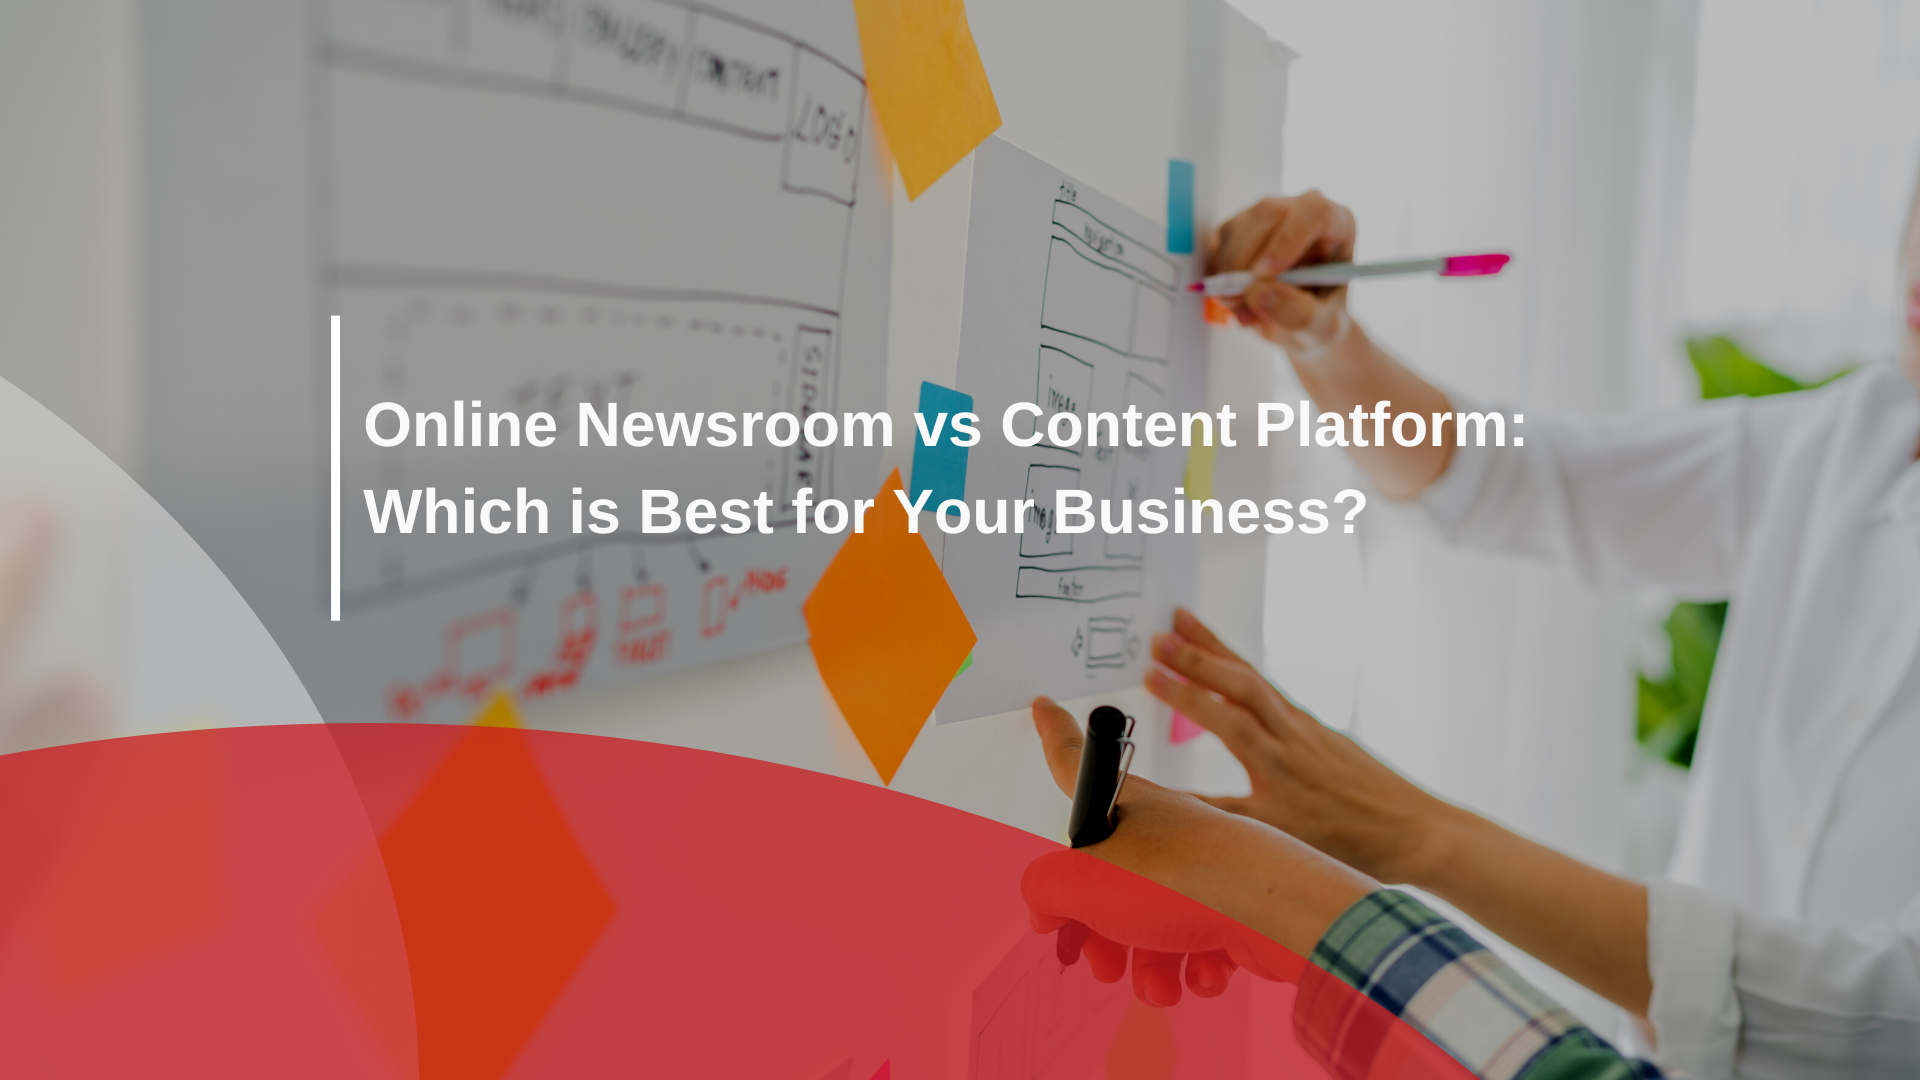 Online Newsroom vs Content Platform: Which is Best for Your Business?